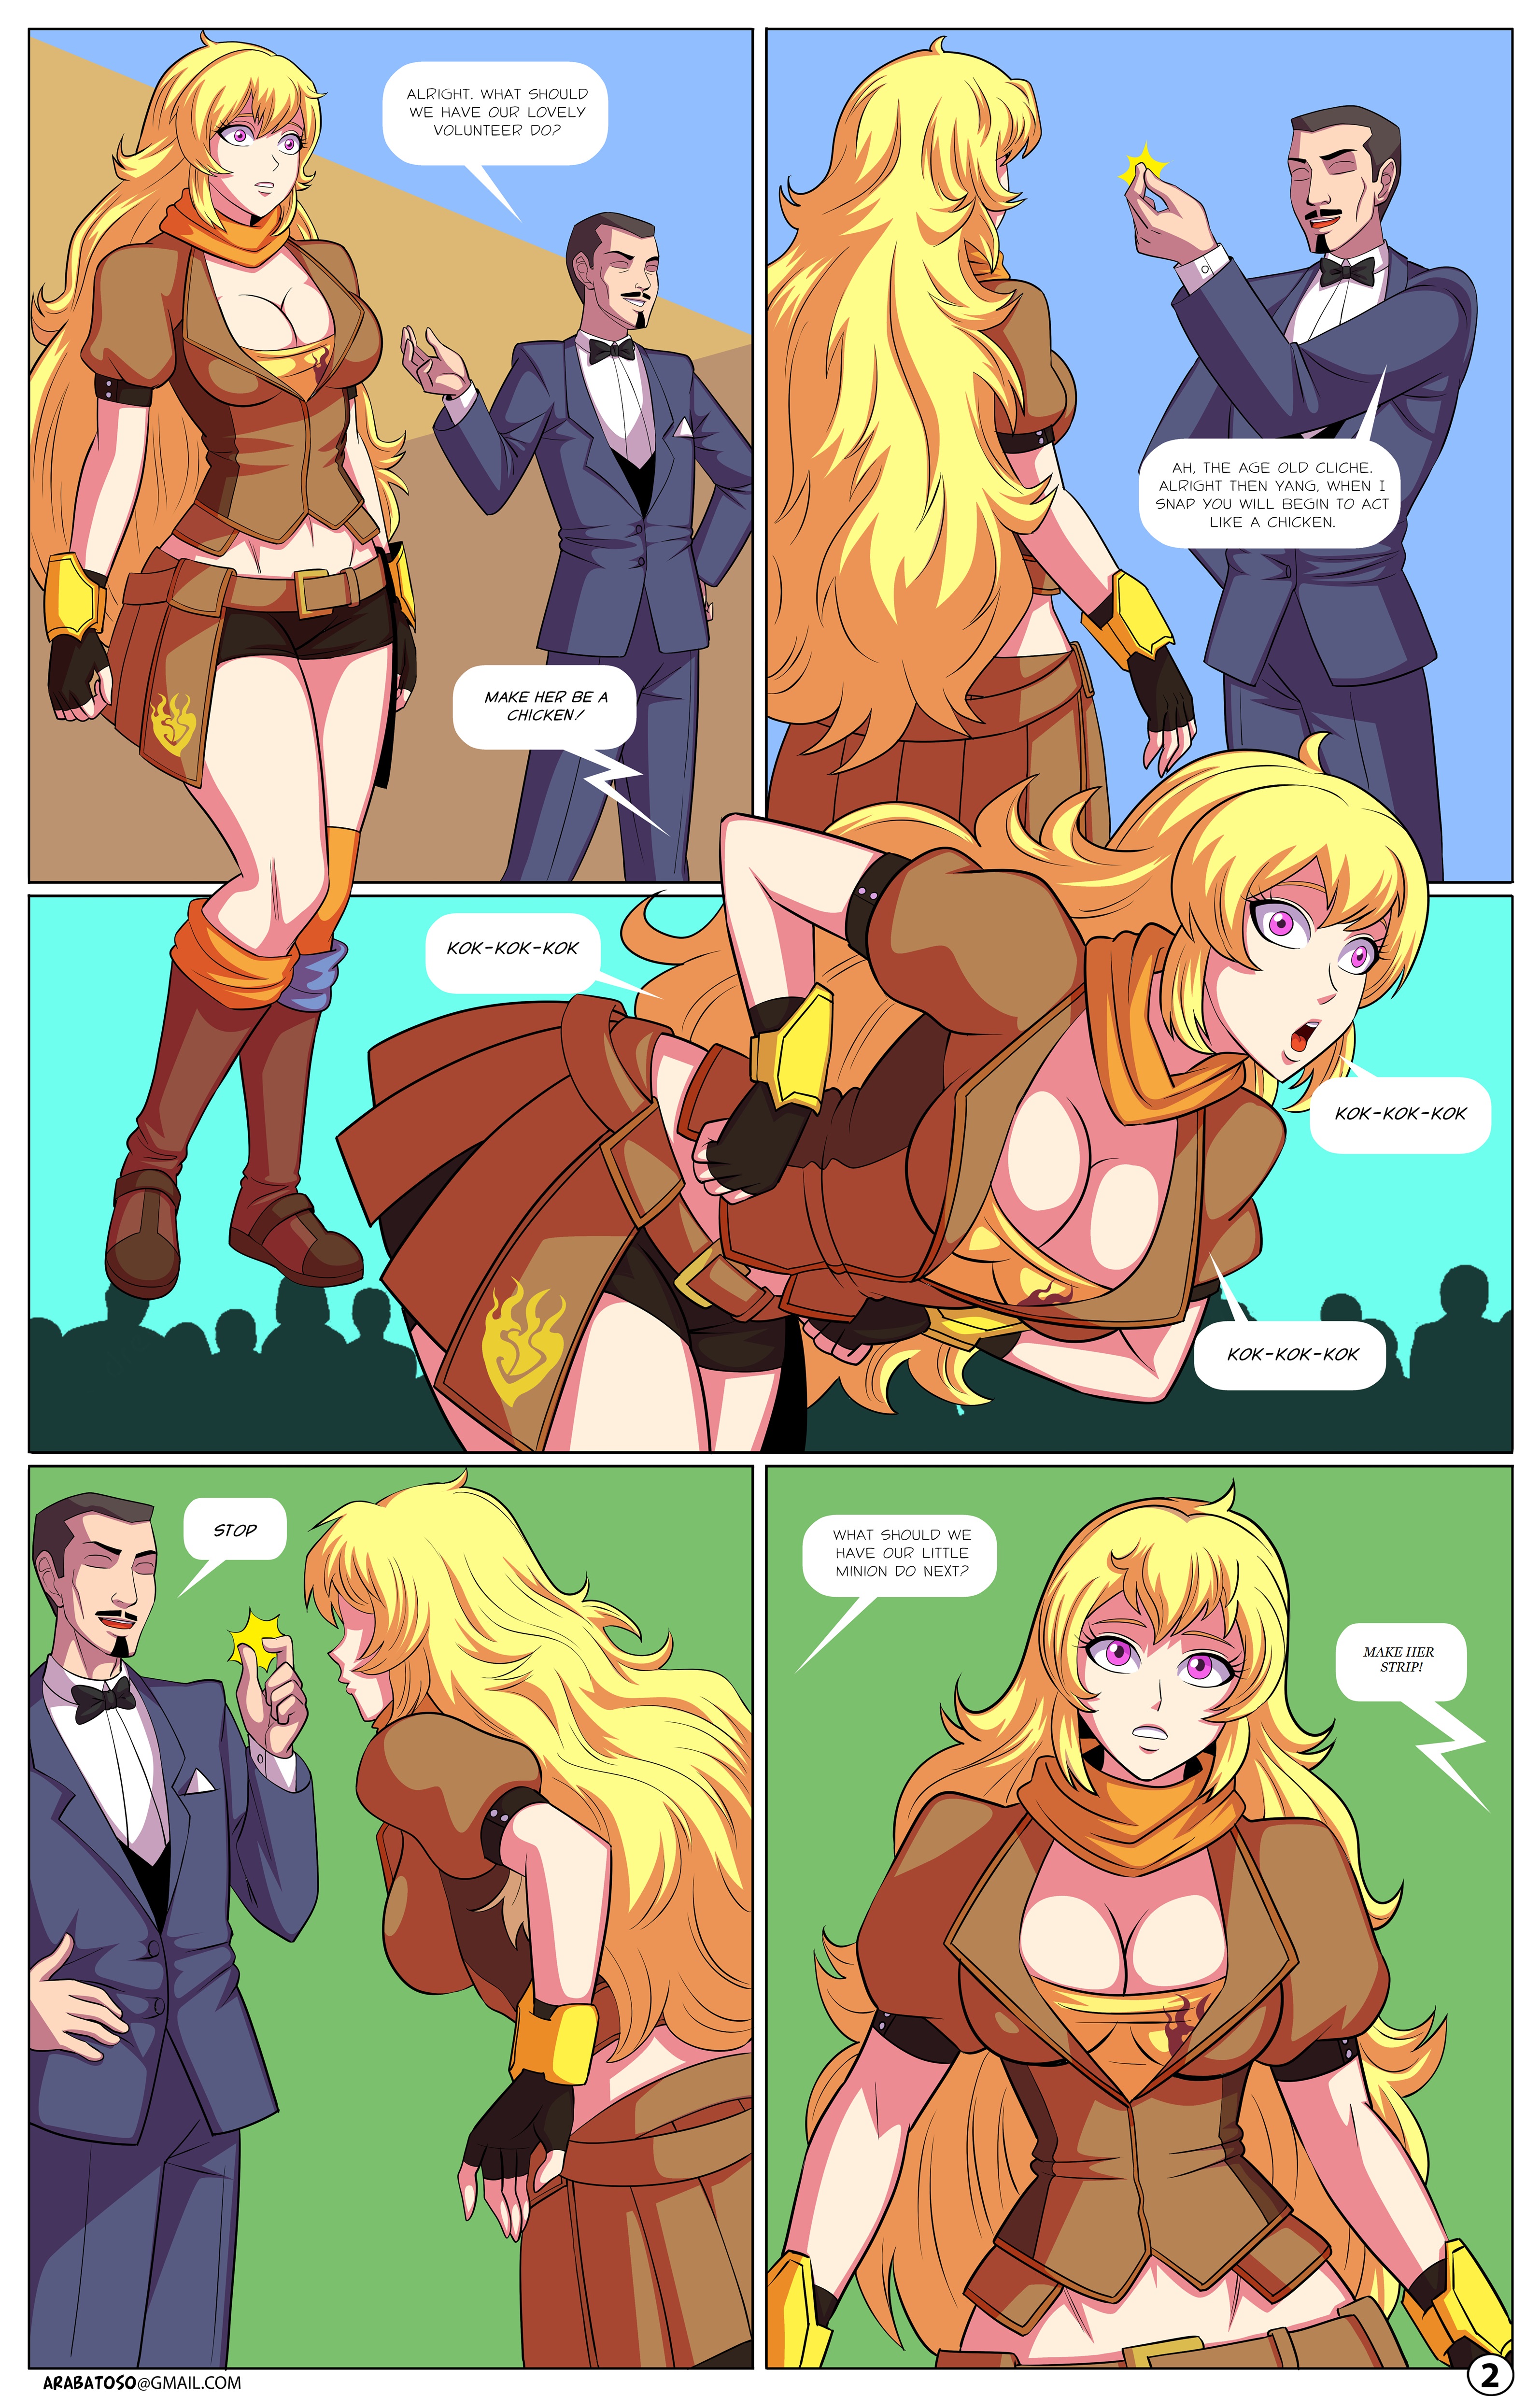 Updated by Arabatos RWBY Universe H Update 9 pages Porn Comic